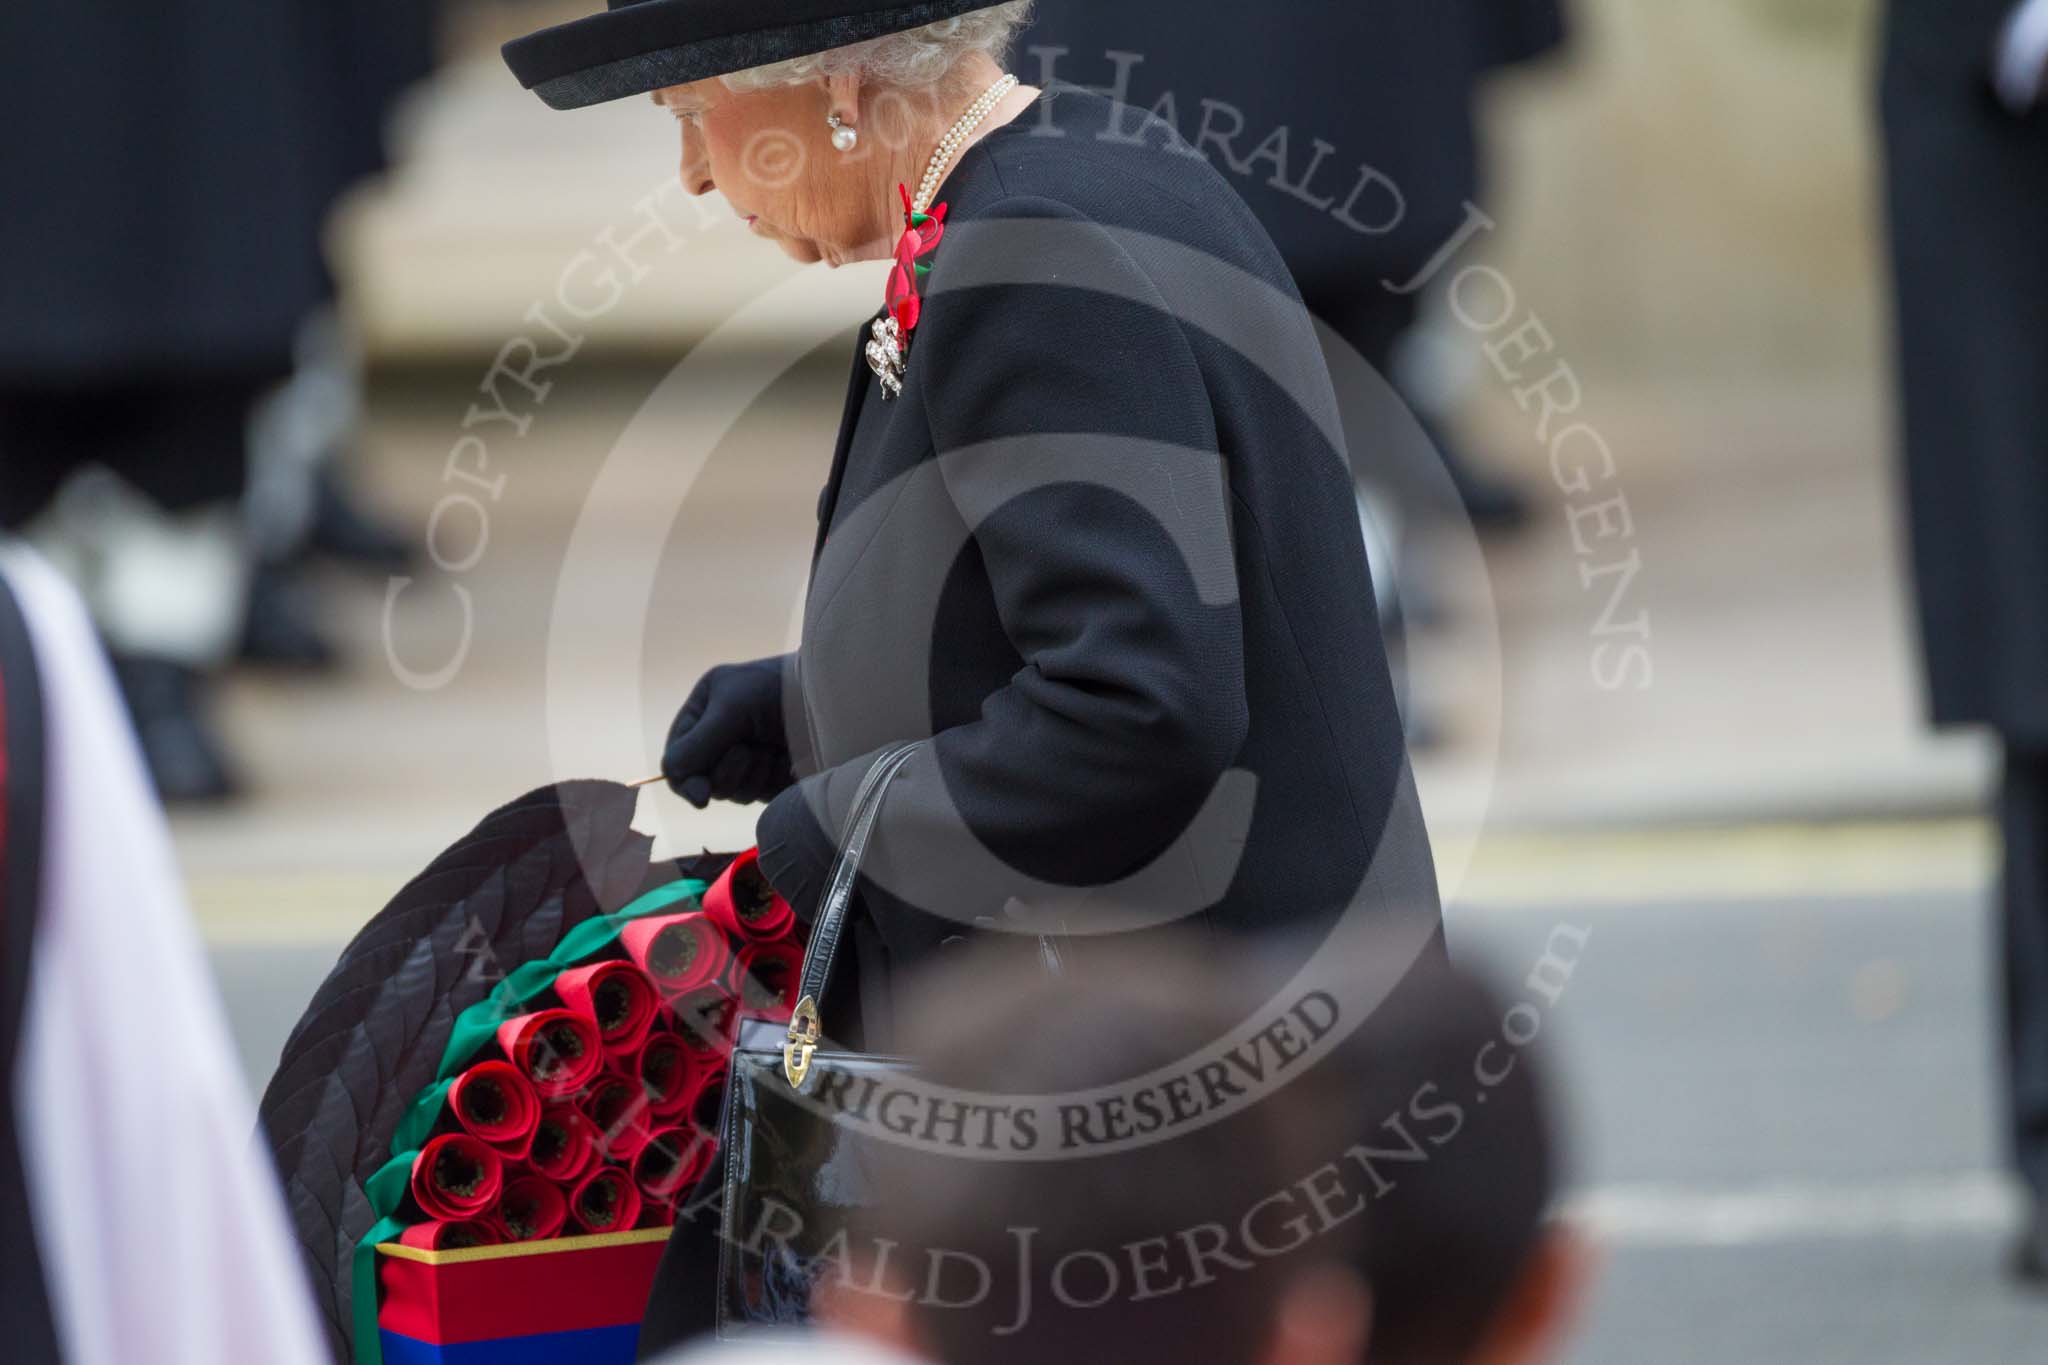 Remembrance Sunday at the Cenotaph 2015: HM The Queen walking toward the Cenotaph with her wreath. Image #174, 08 November 2015 11:03 Whitehall, London, UK